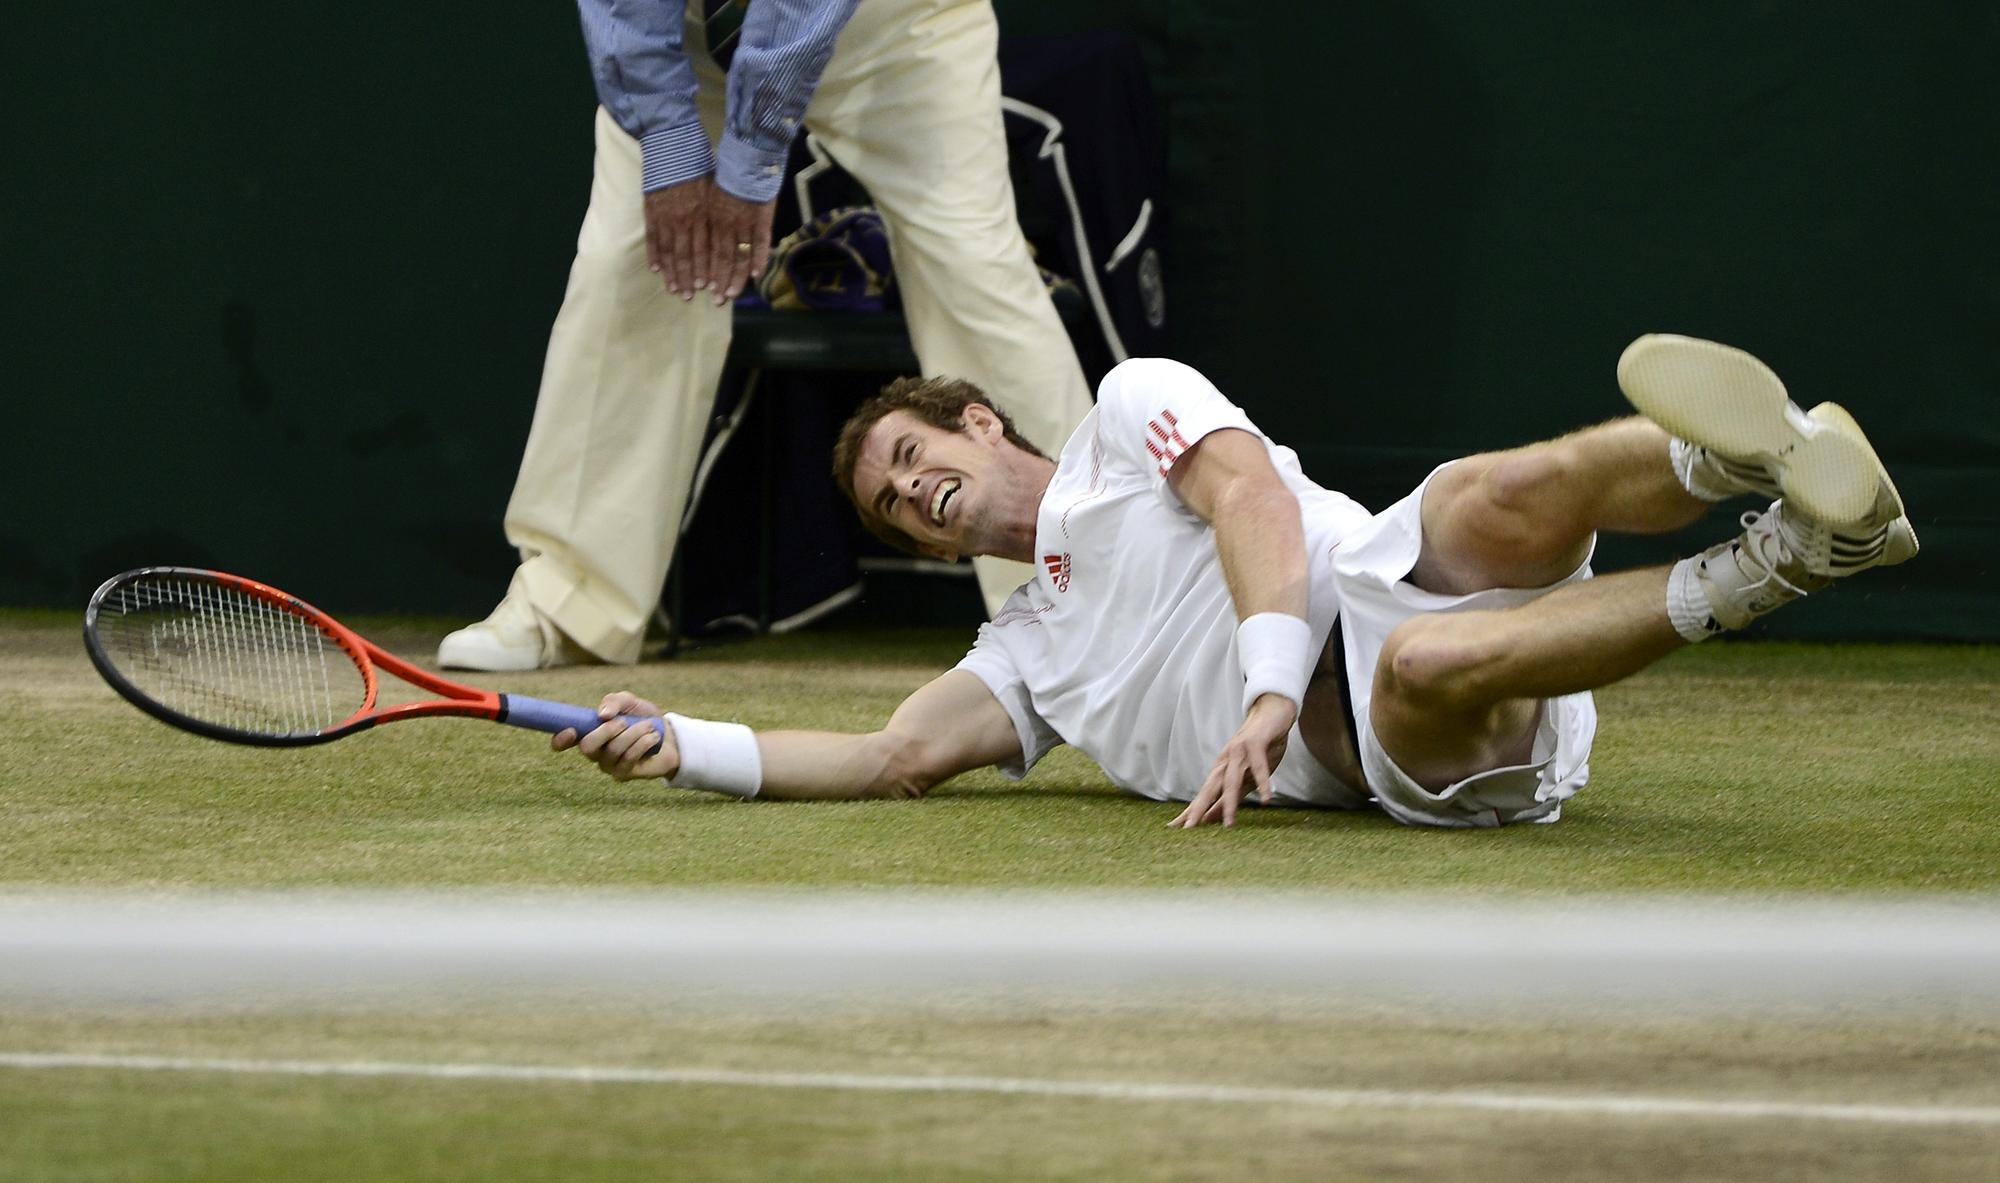 Andy Murray of Britain falls during his men's singles final tennis match against Roger Federer of Switzerland at the Wimbledon Tennis Championships in London July 8, 2012. REUTERS/Dylan Martinez (BRITAIN - Tags: SPORT TENNIS) [REUTERS - Dylan Martinez]